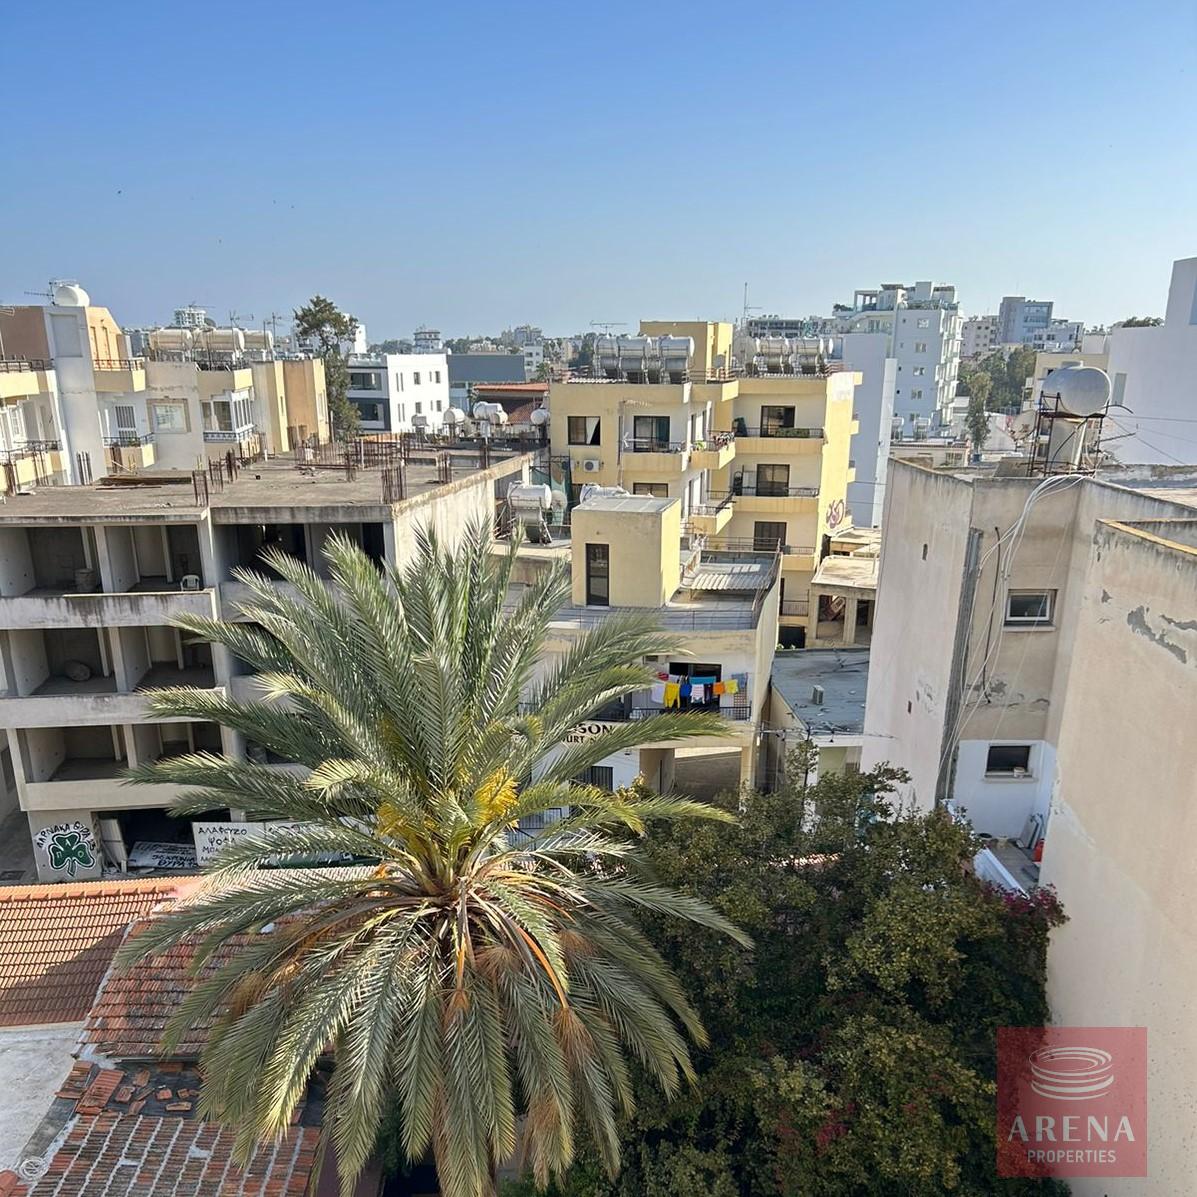 3 bed apt for rent in Larnaca - views